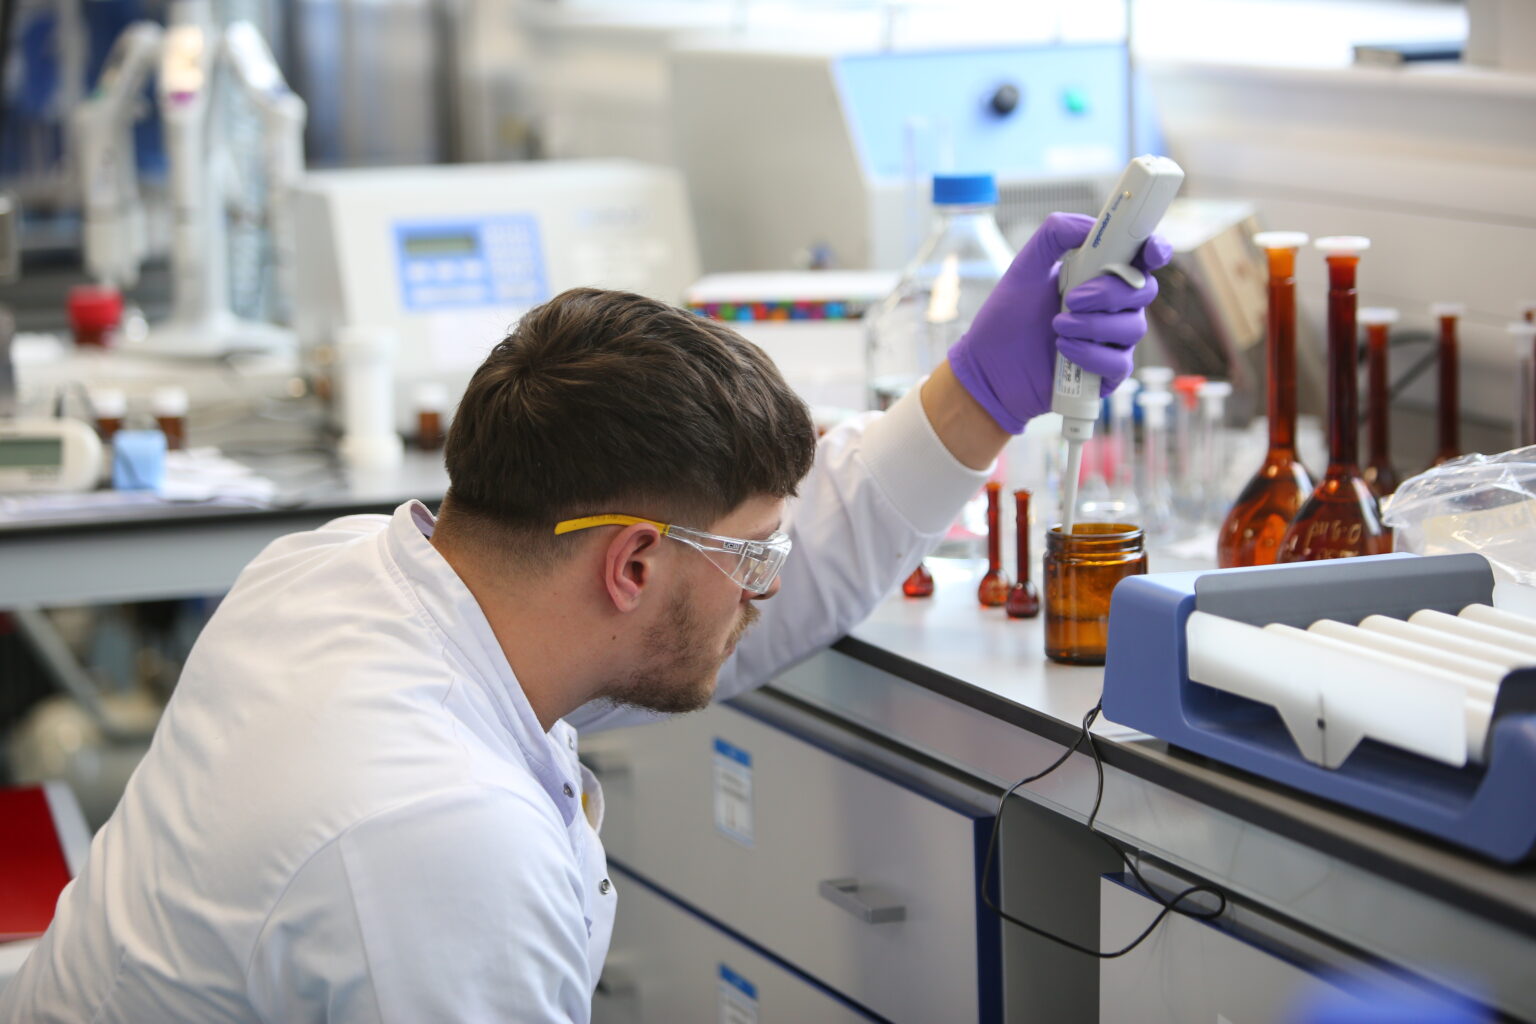 Man with brown hair in lab coat crouches beside lab bench pipetting sample for OINDP development services.